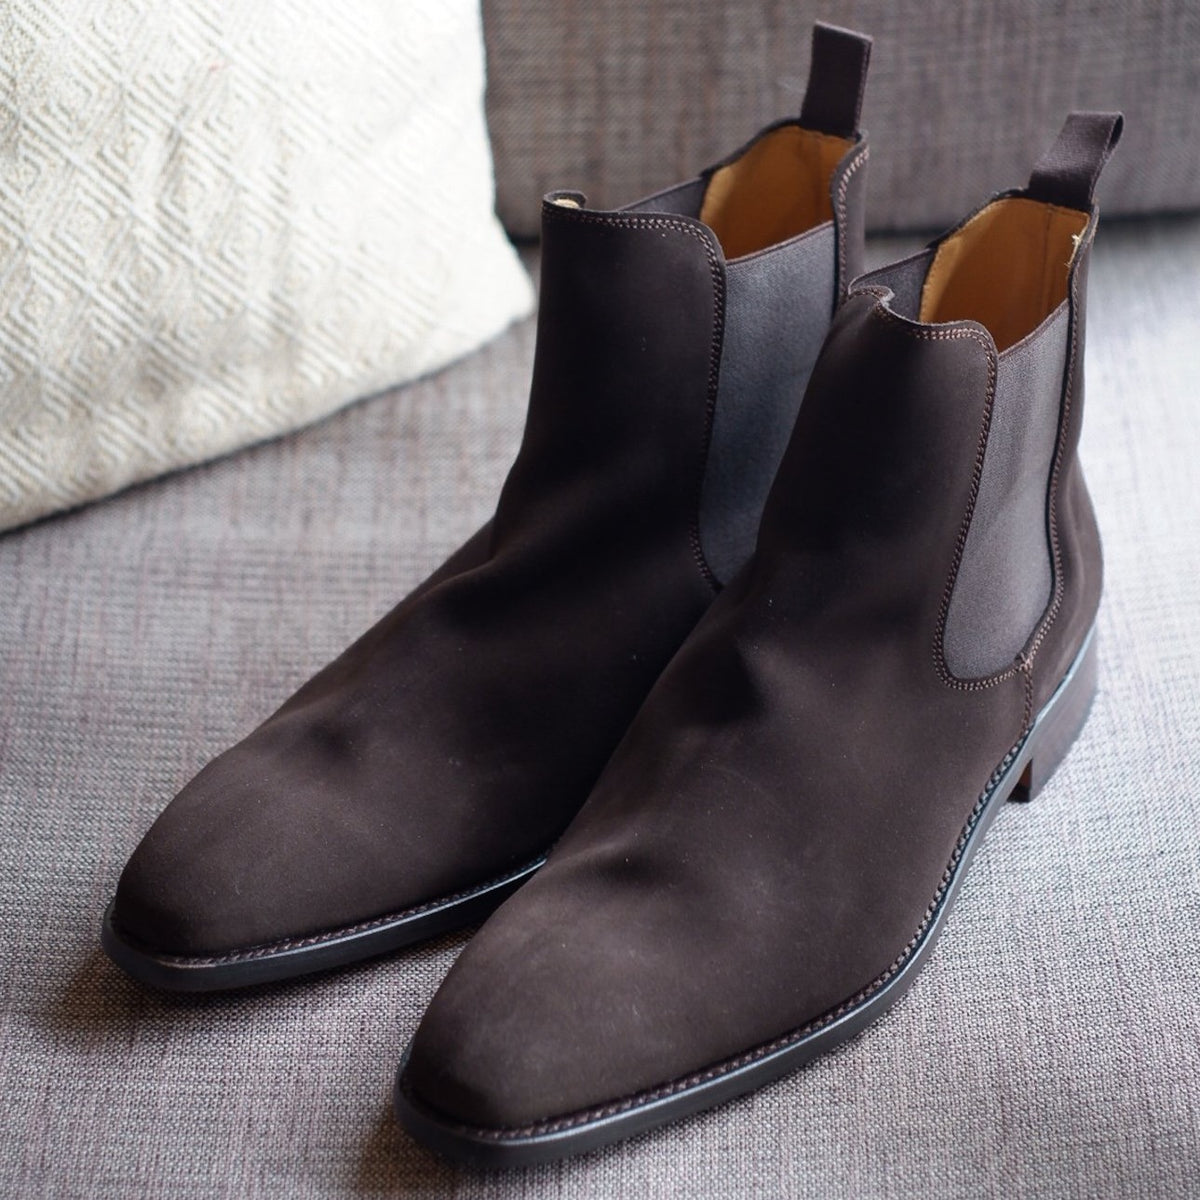 Berwick 1707 Chelsea Boots in Dark Brown Suede – Hardly Ever Found